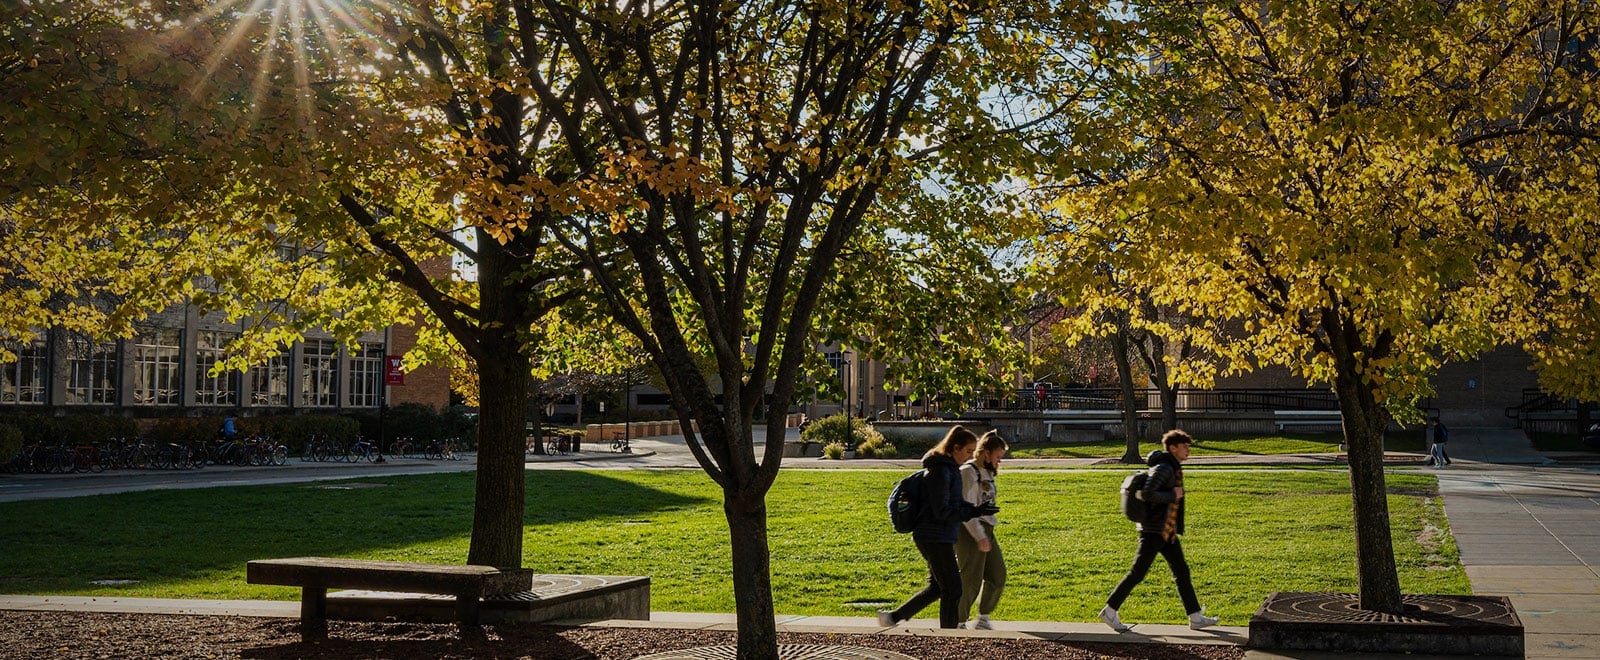 Three students walk along a campus sidewalk under trees whose leaves have turned golden with the onset of fall.